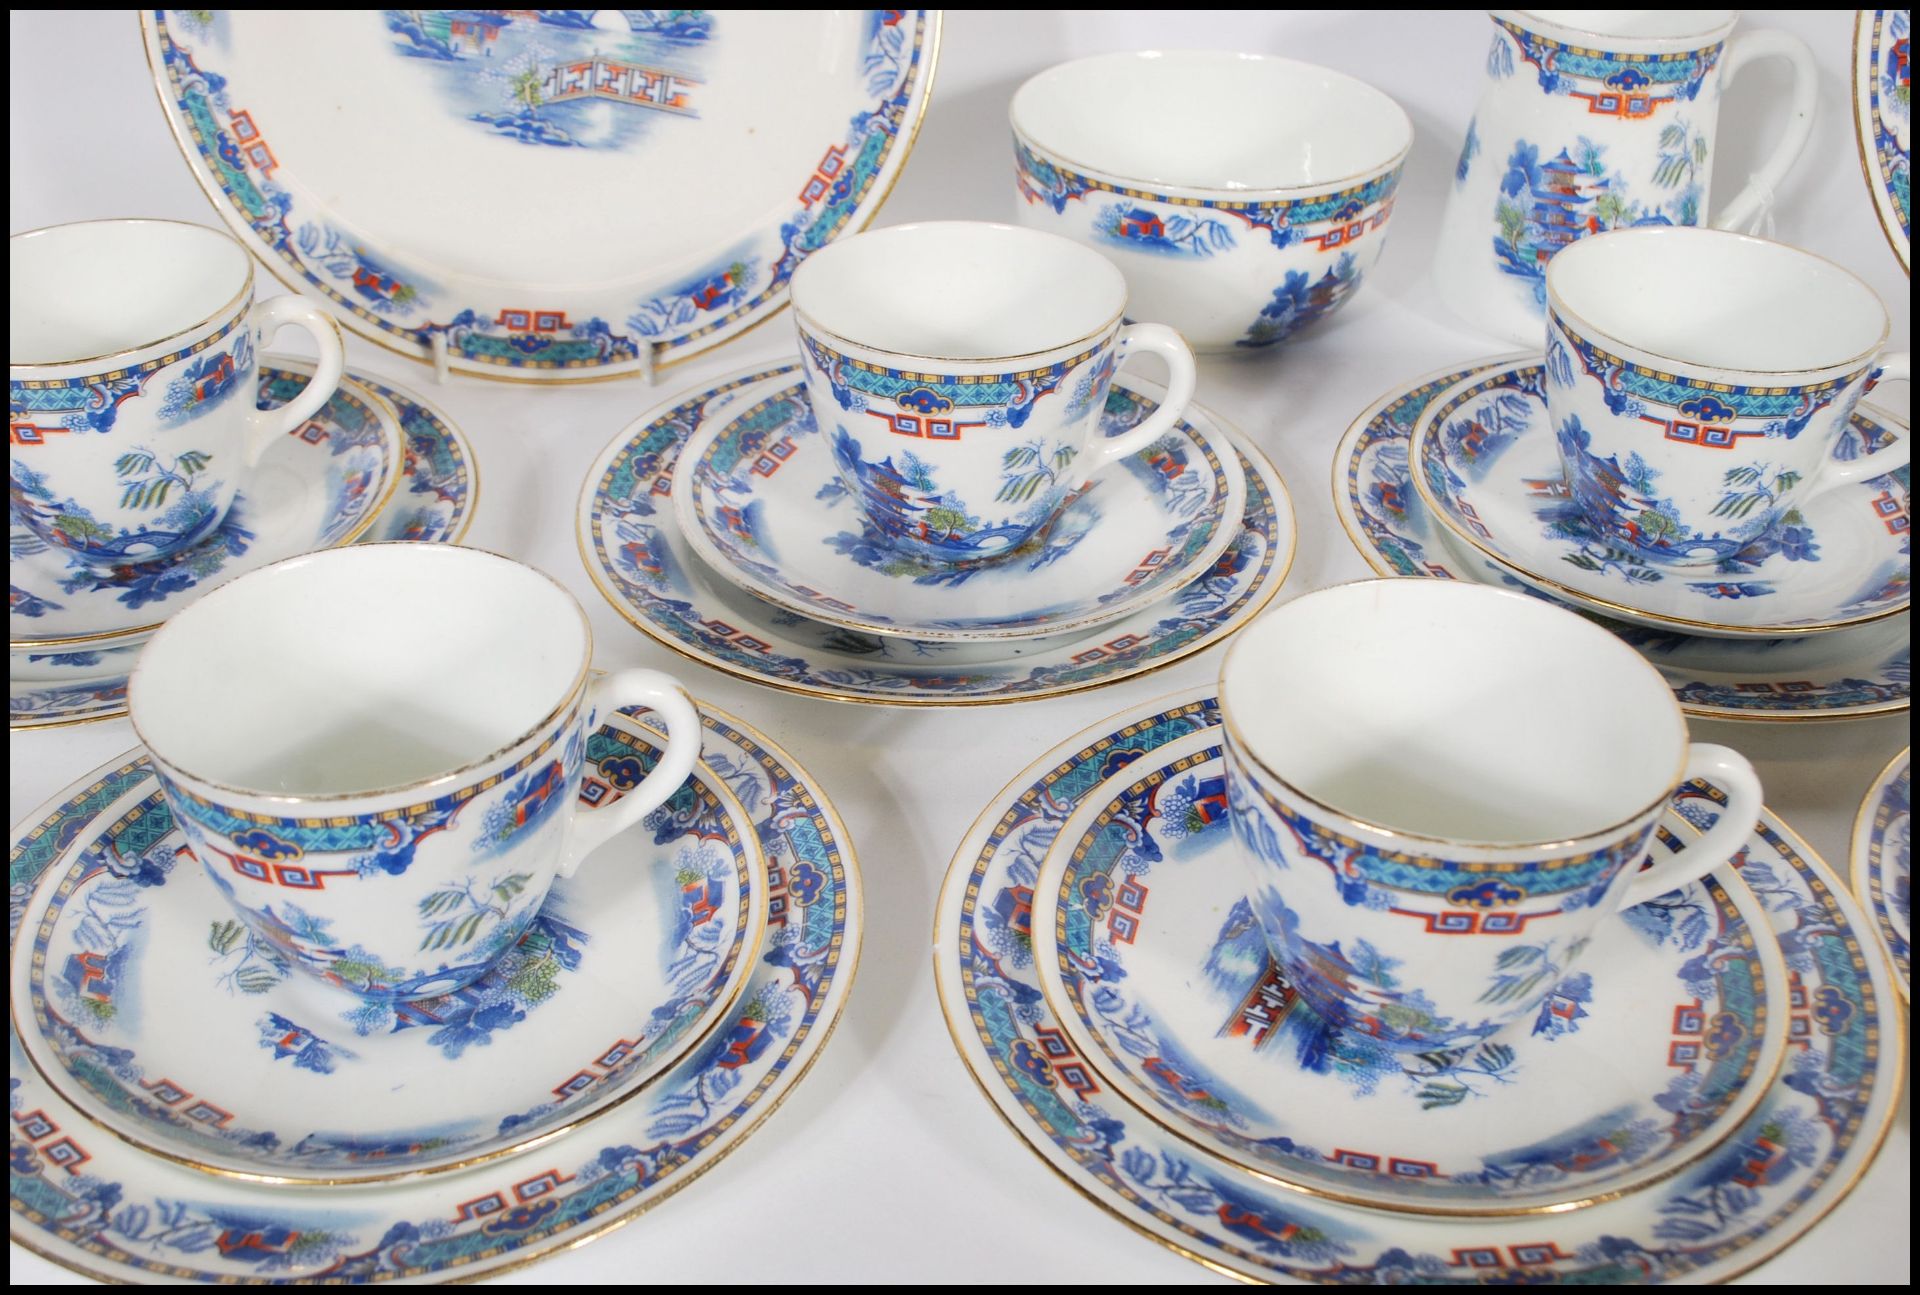 A 20th Century Staffordshire blue and white tea service in the Willow pattern, having red and - Image 4 of 8